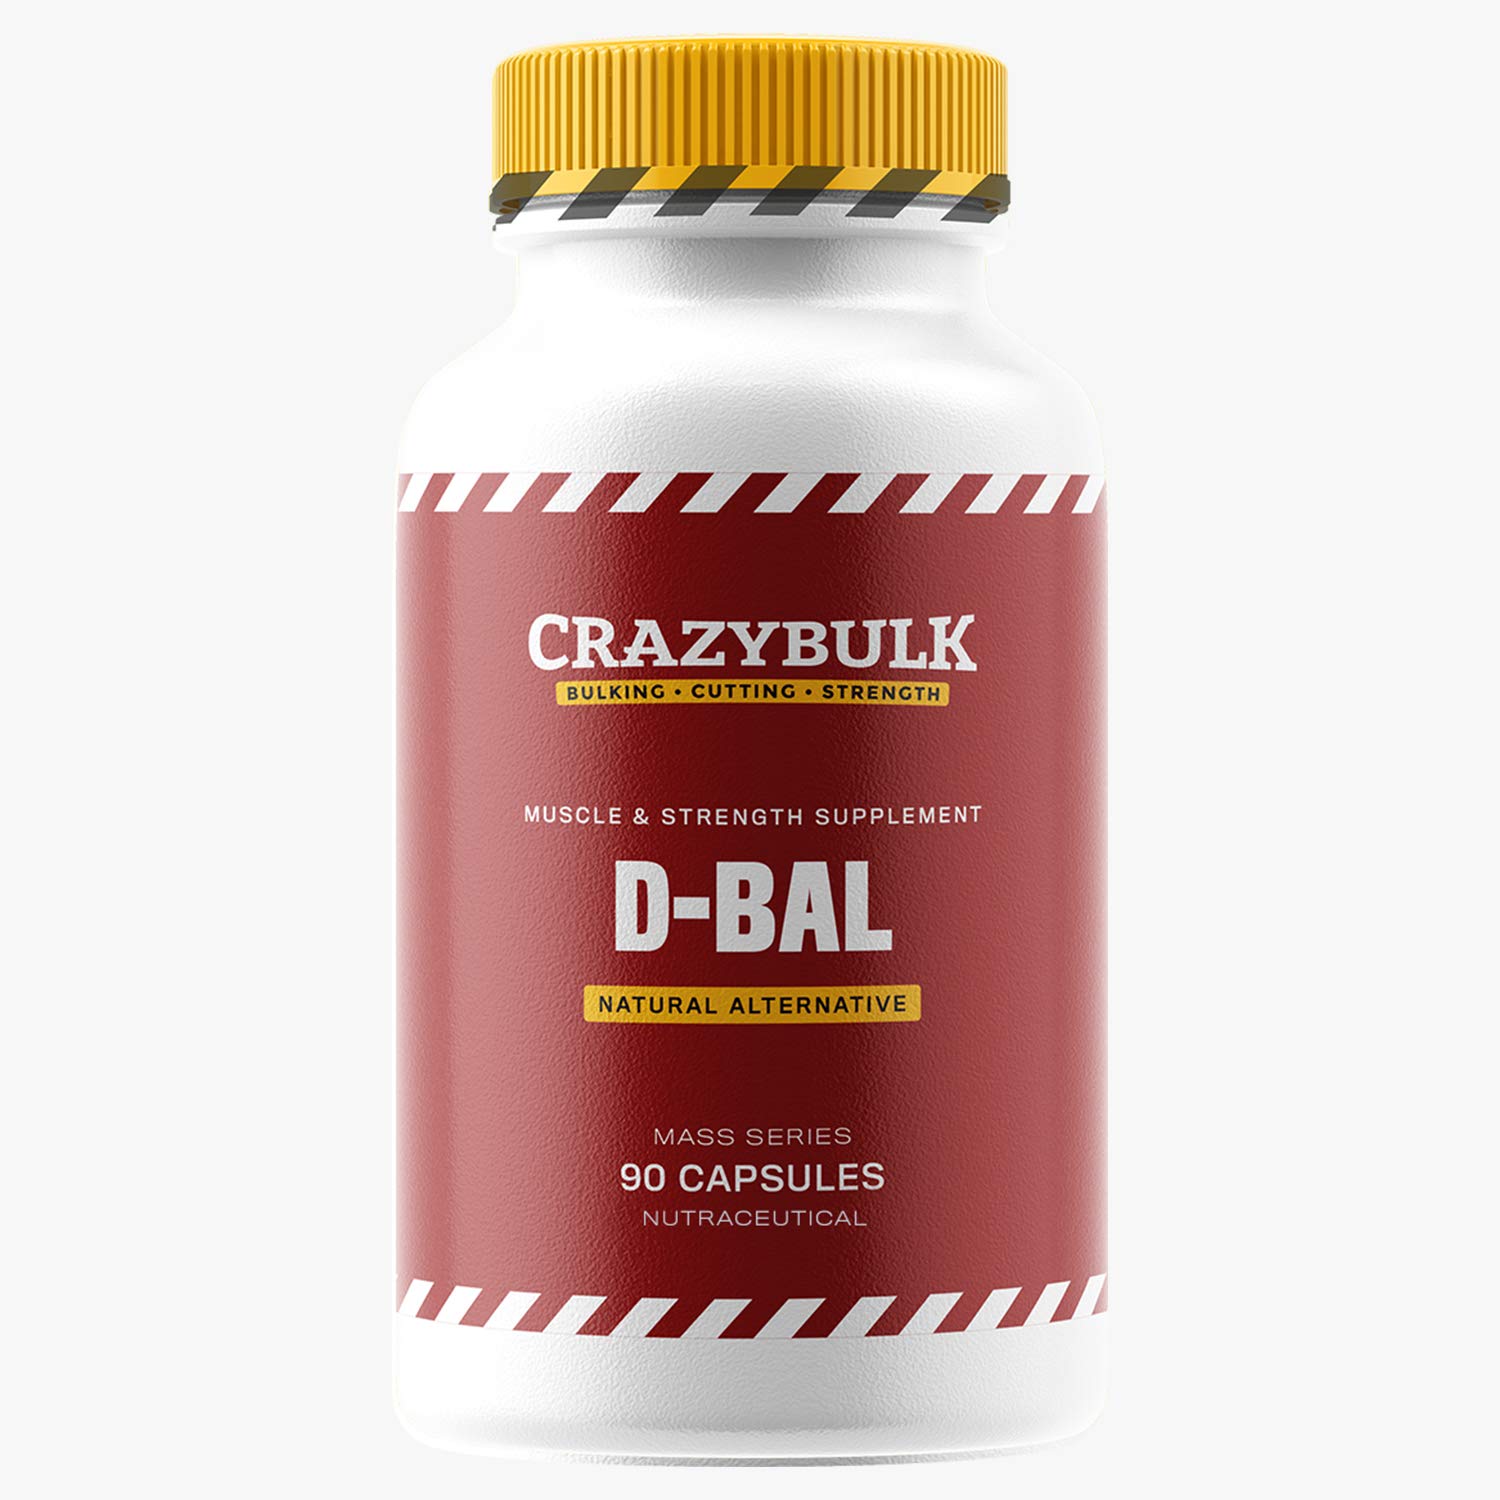 dbal - Is Dianabol a Steroid?